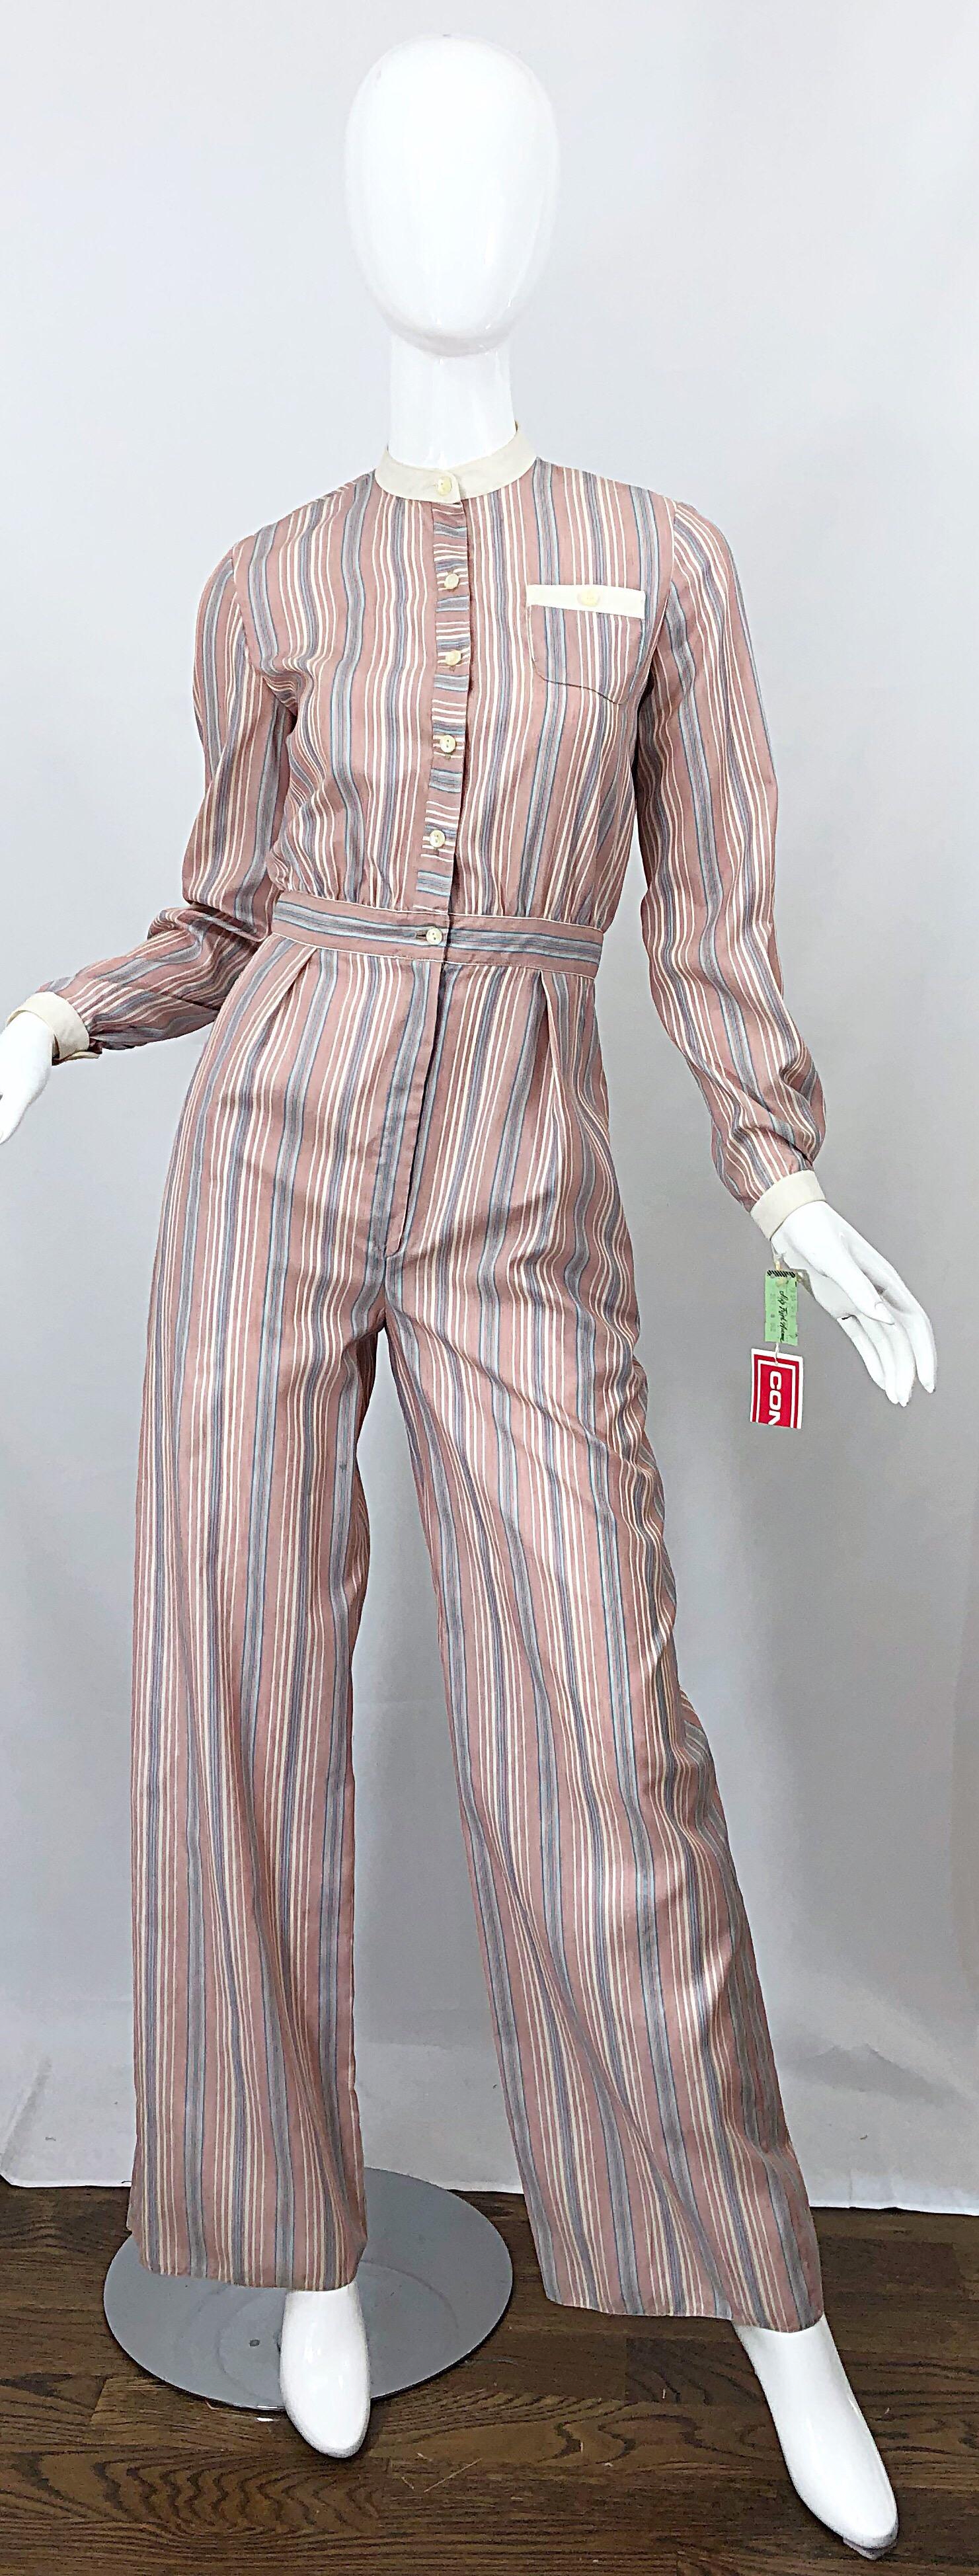 Stylish brand new with original SAKS 5th AVENUE store tags attached RONALD KOLODZIE striped one piece jumpsuit! Features blue and rose pink stripes throughout. Sleek fitted bodice buttons up the front. Comfortable wide leg pants have pockets at each